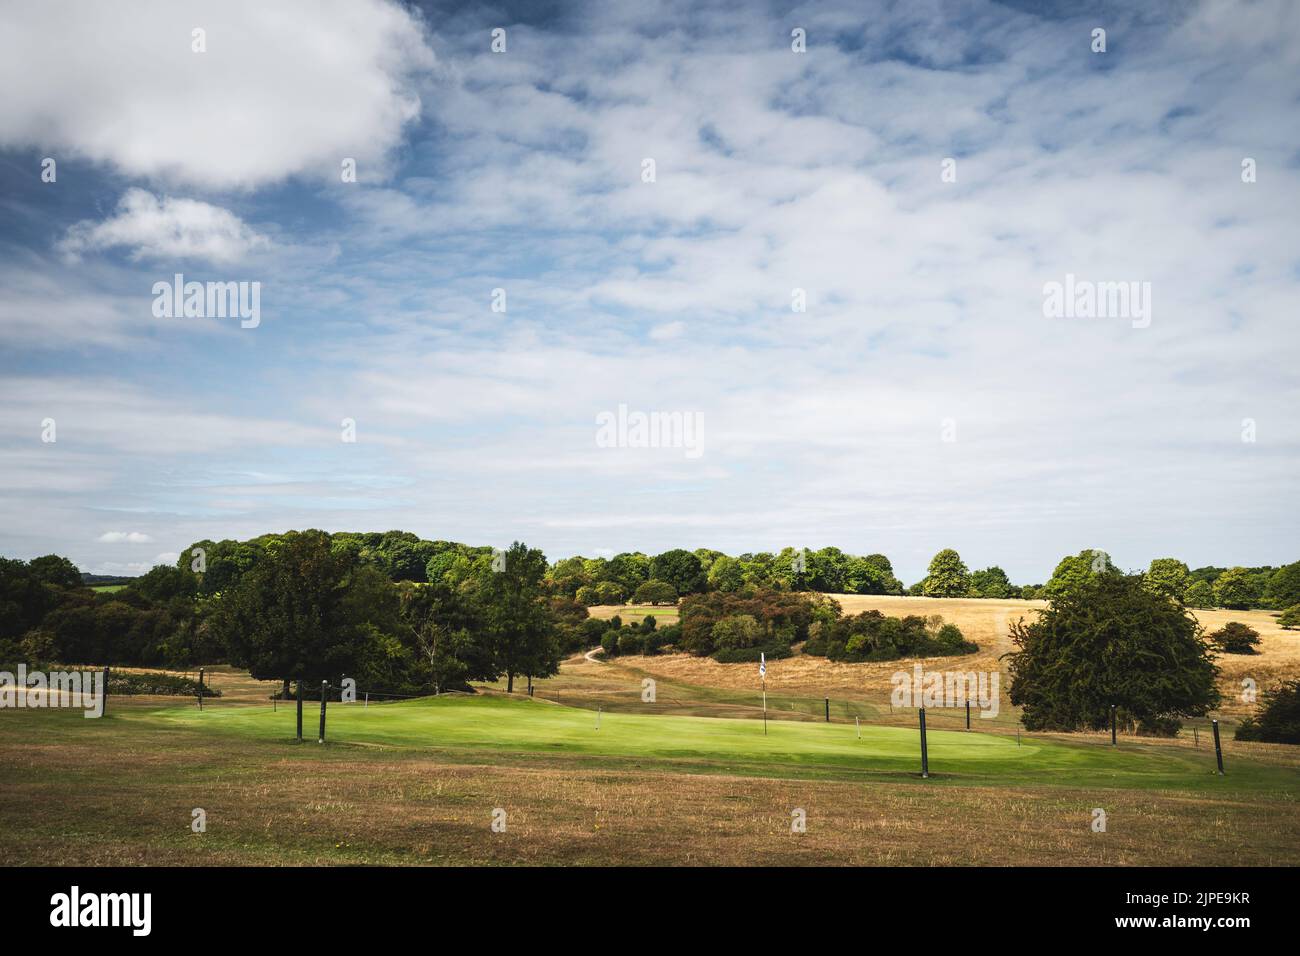 Golf course covered in dry grassland with green grass over hole from watering  during extreme heatwave all under blue sky in summer in Beverley, UK. Stock Photo